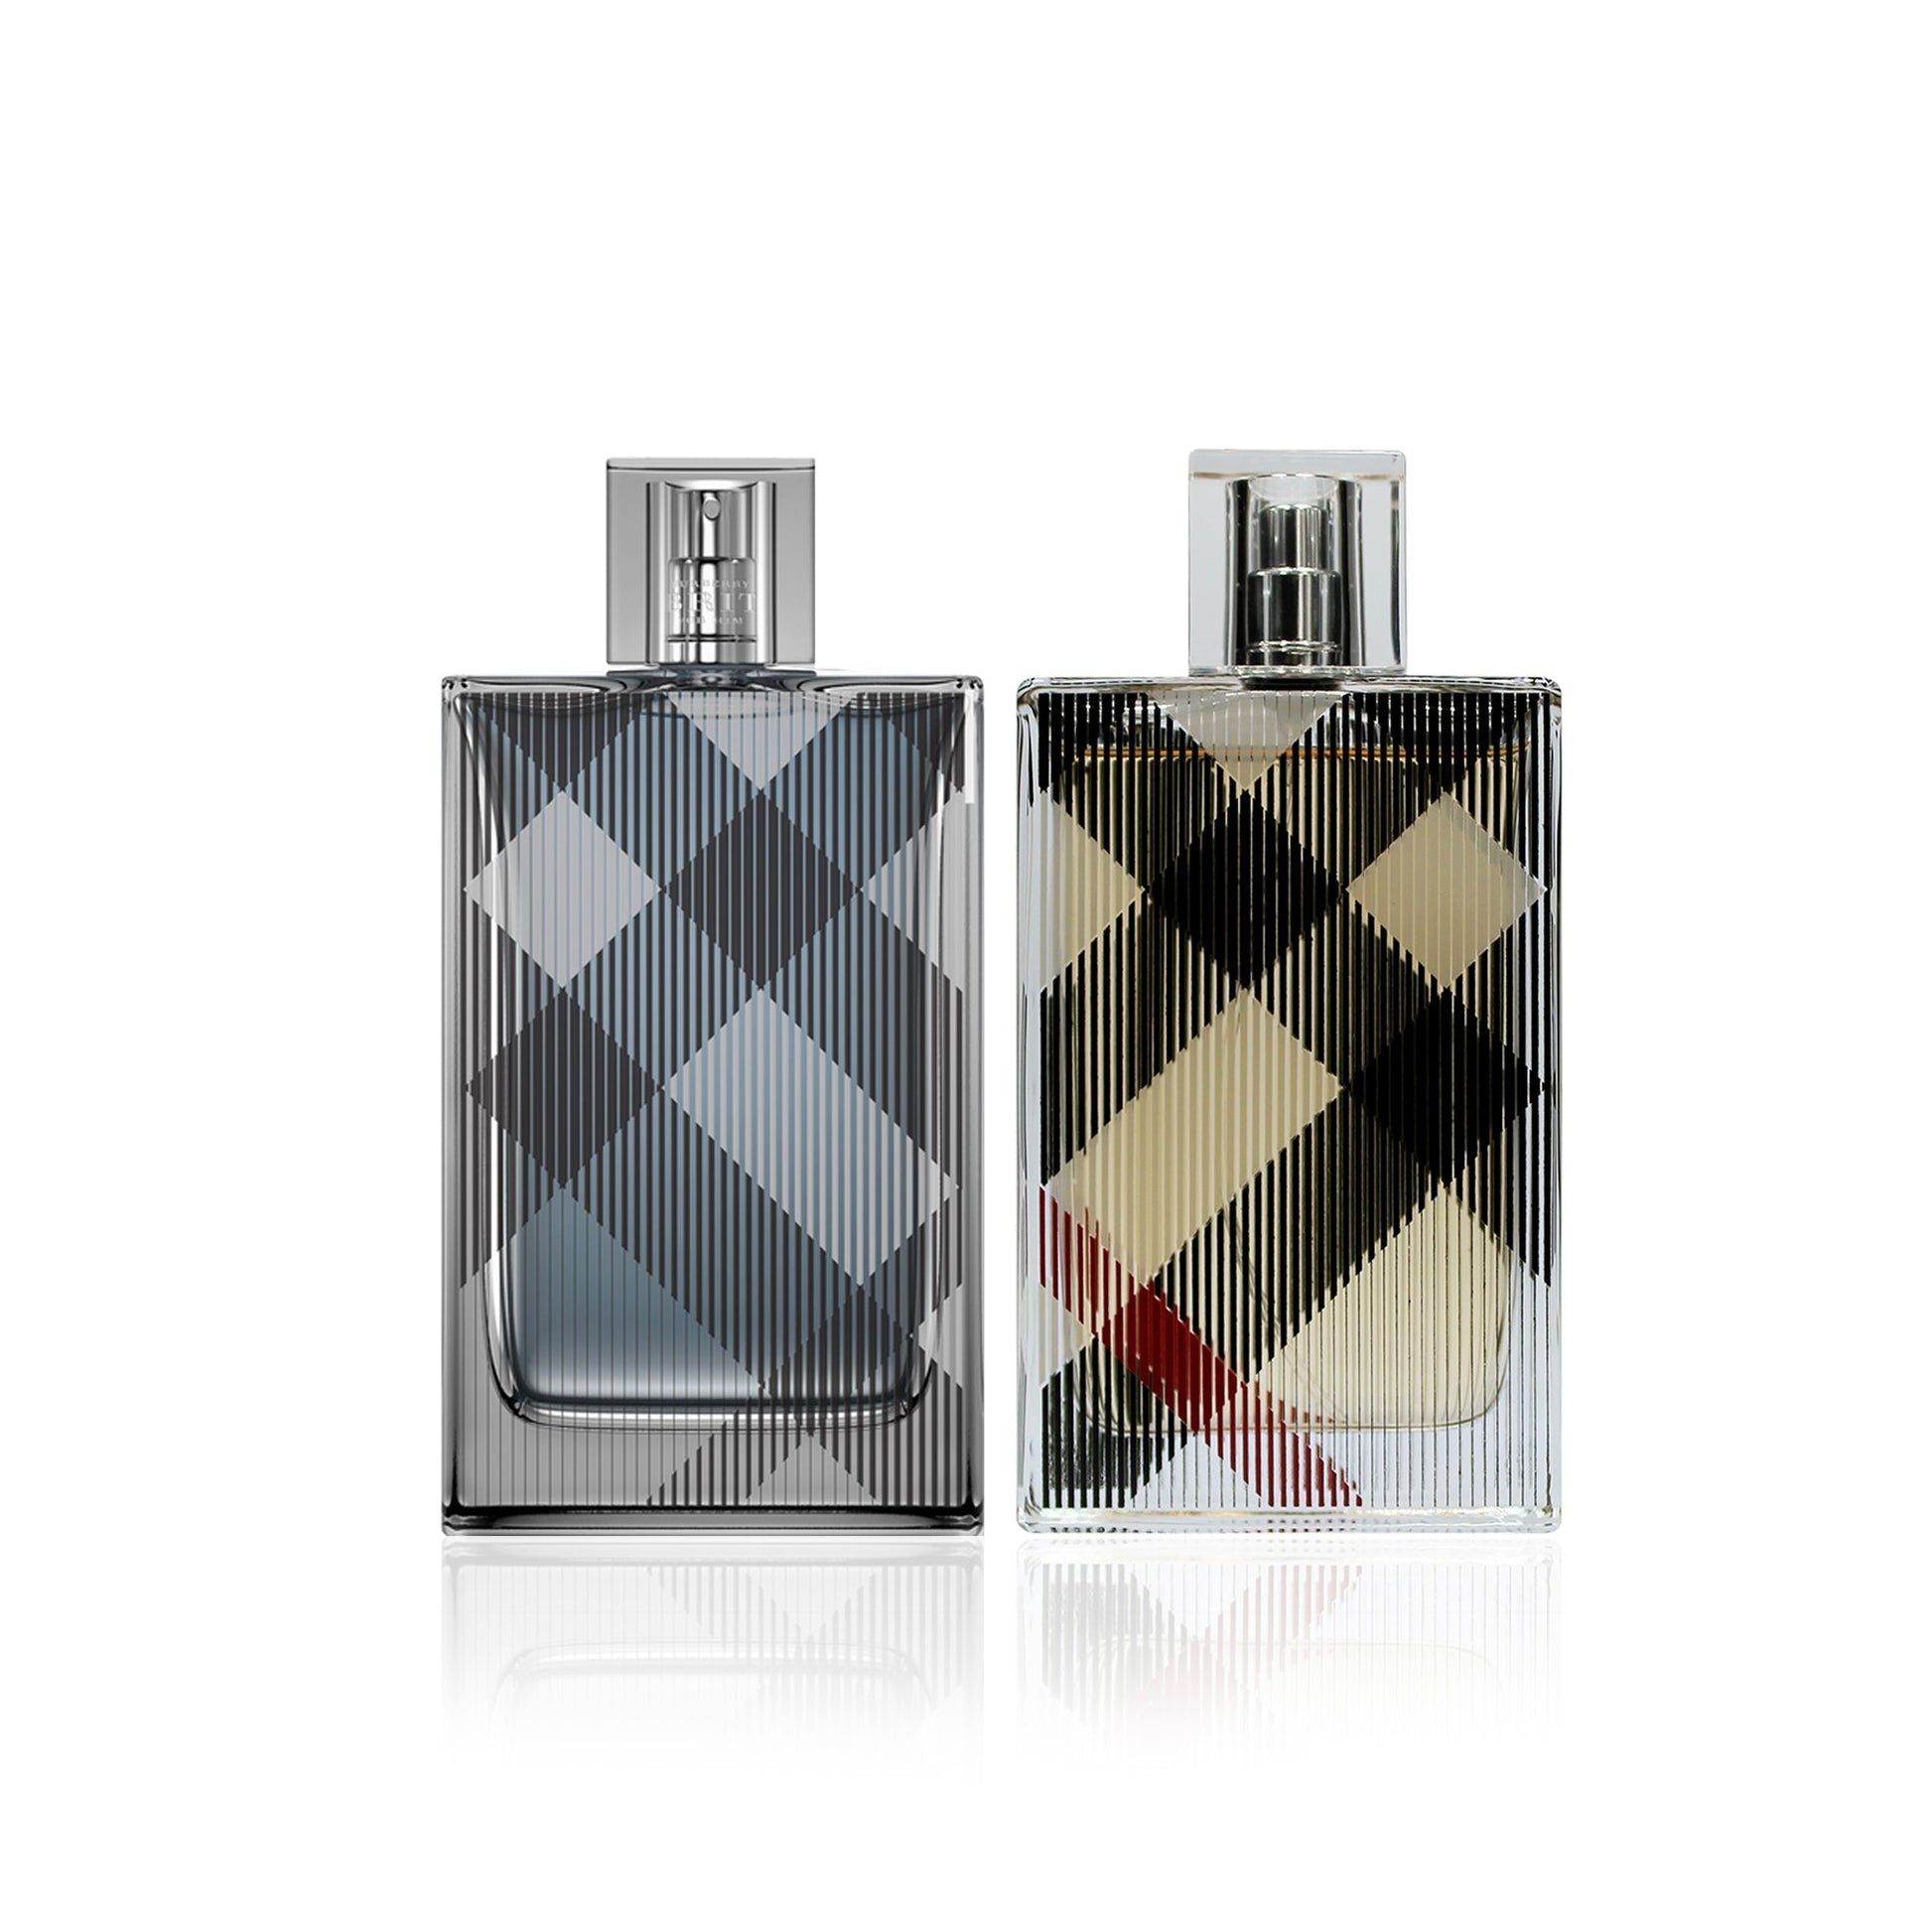 Bundle Deal His & Hers: Burberry Brit by Burberry for Men and Women, Product image 1